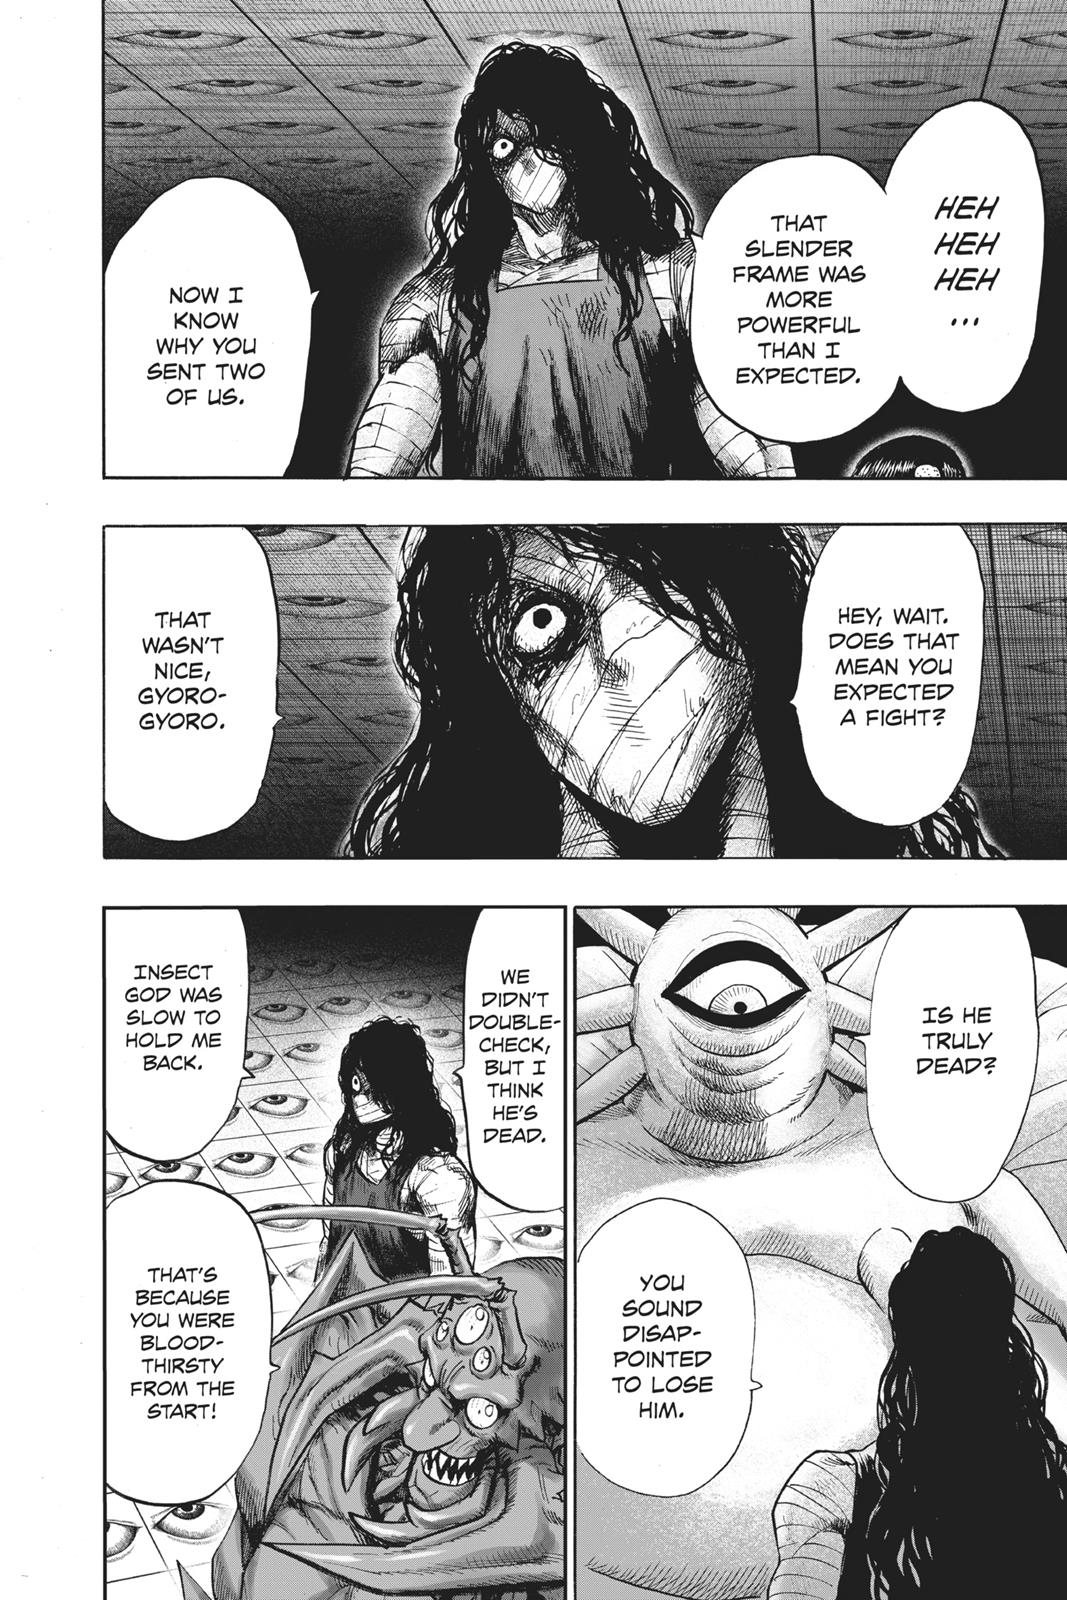 One-Punch Man, Punch 90 image 28